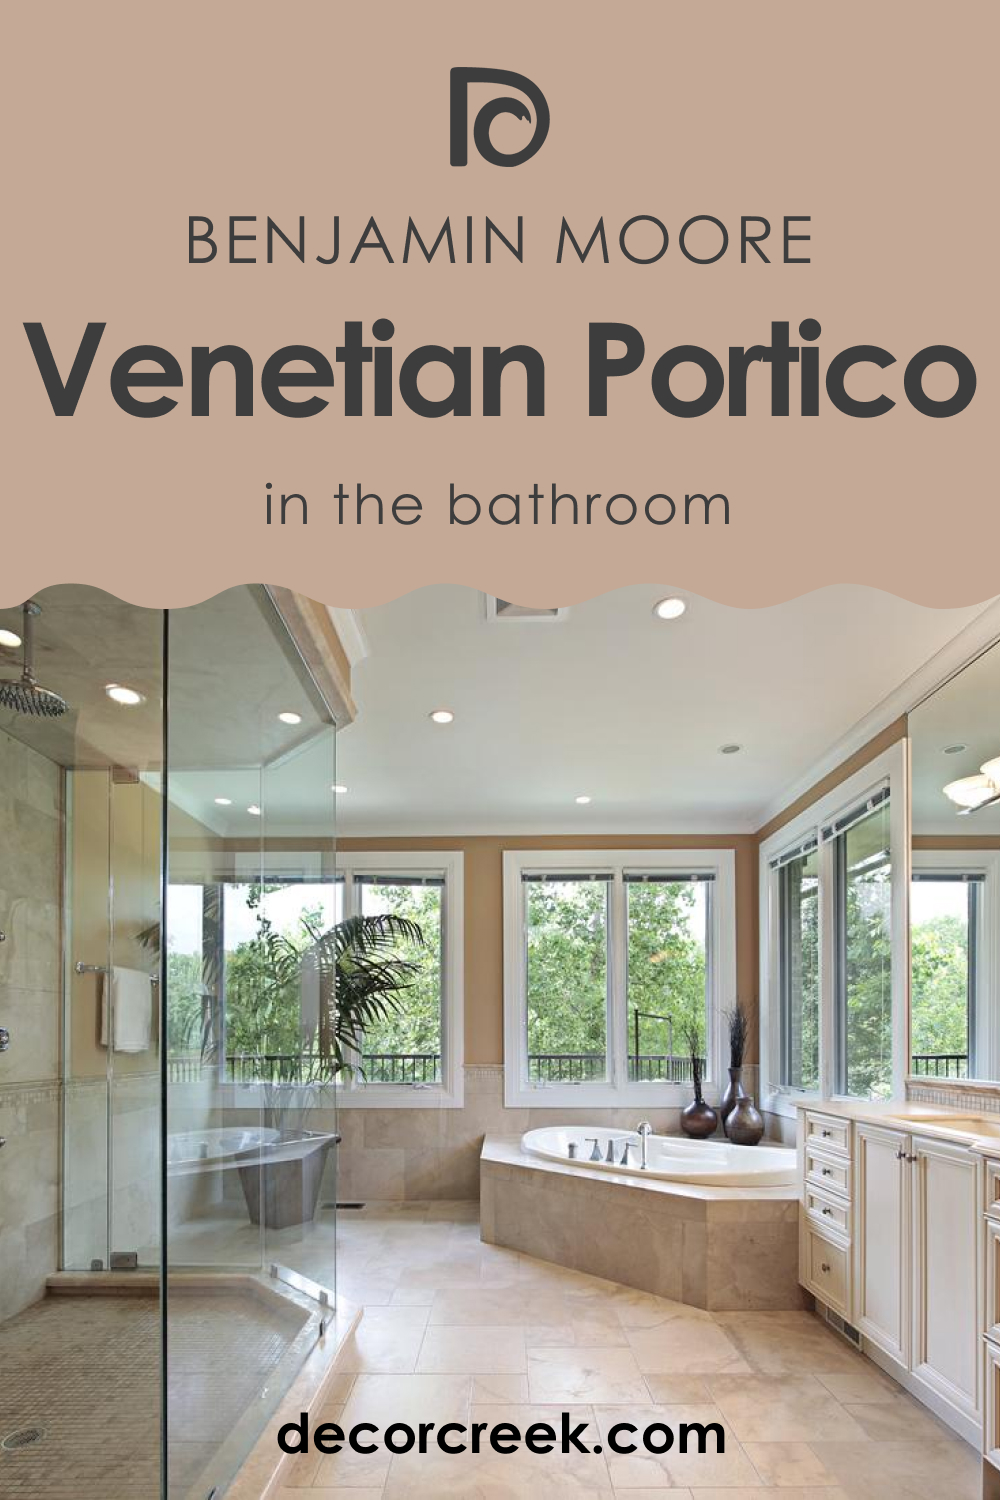 How to Use Venetian Portico AF-185 in the Bathroom?